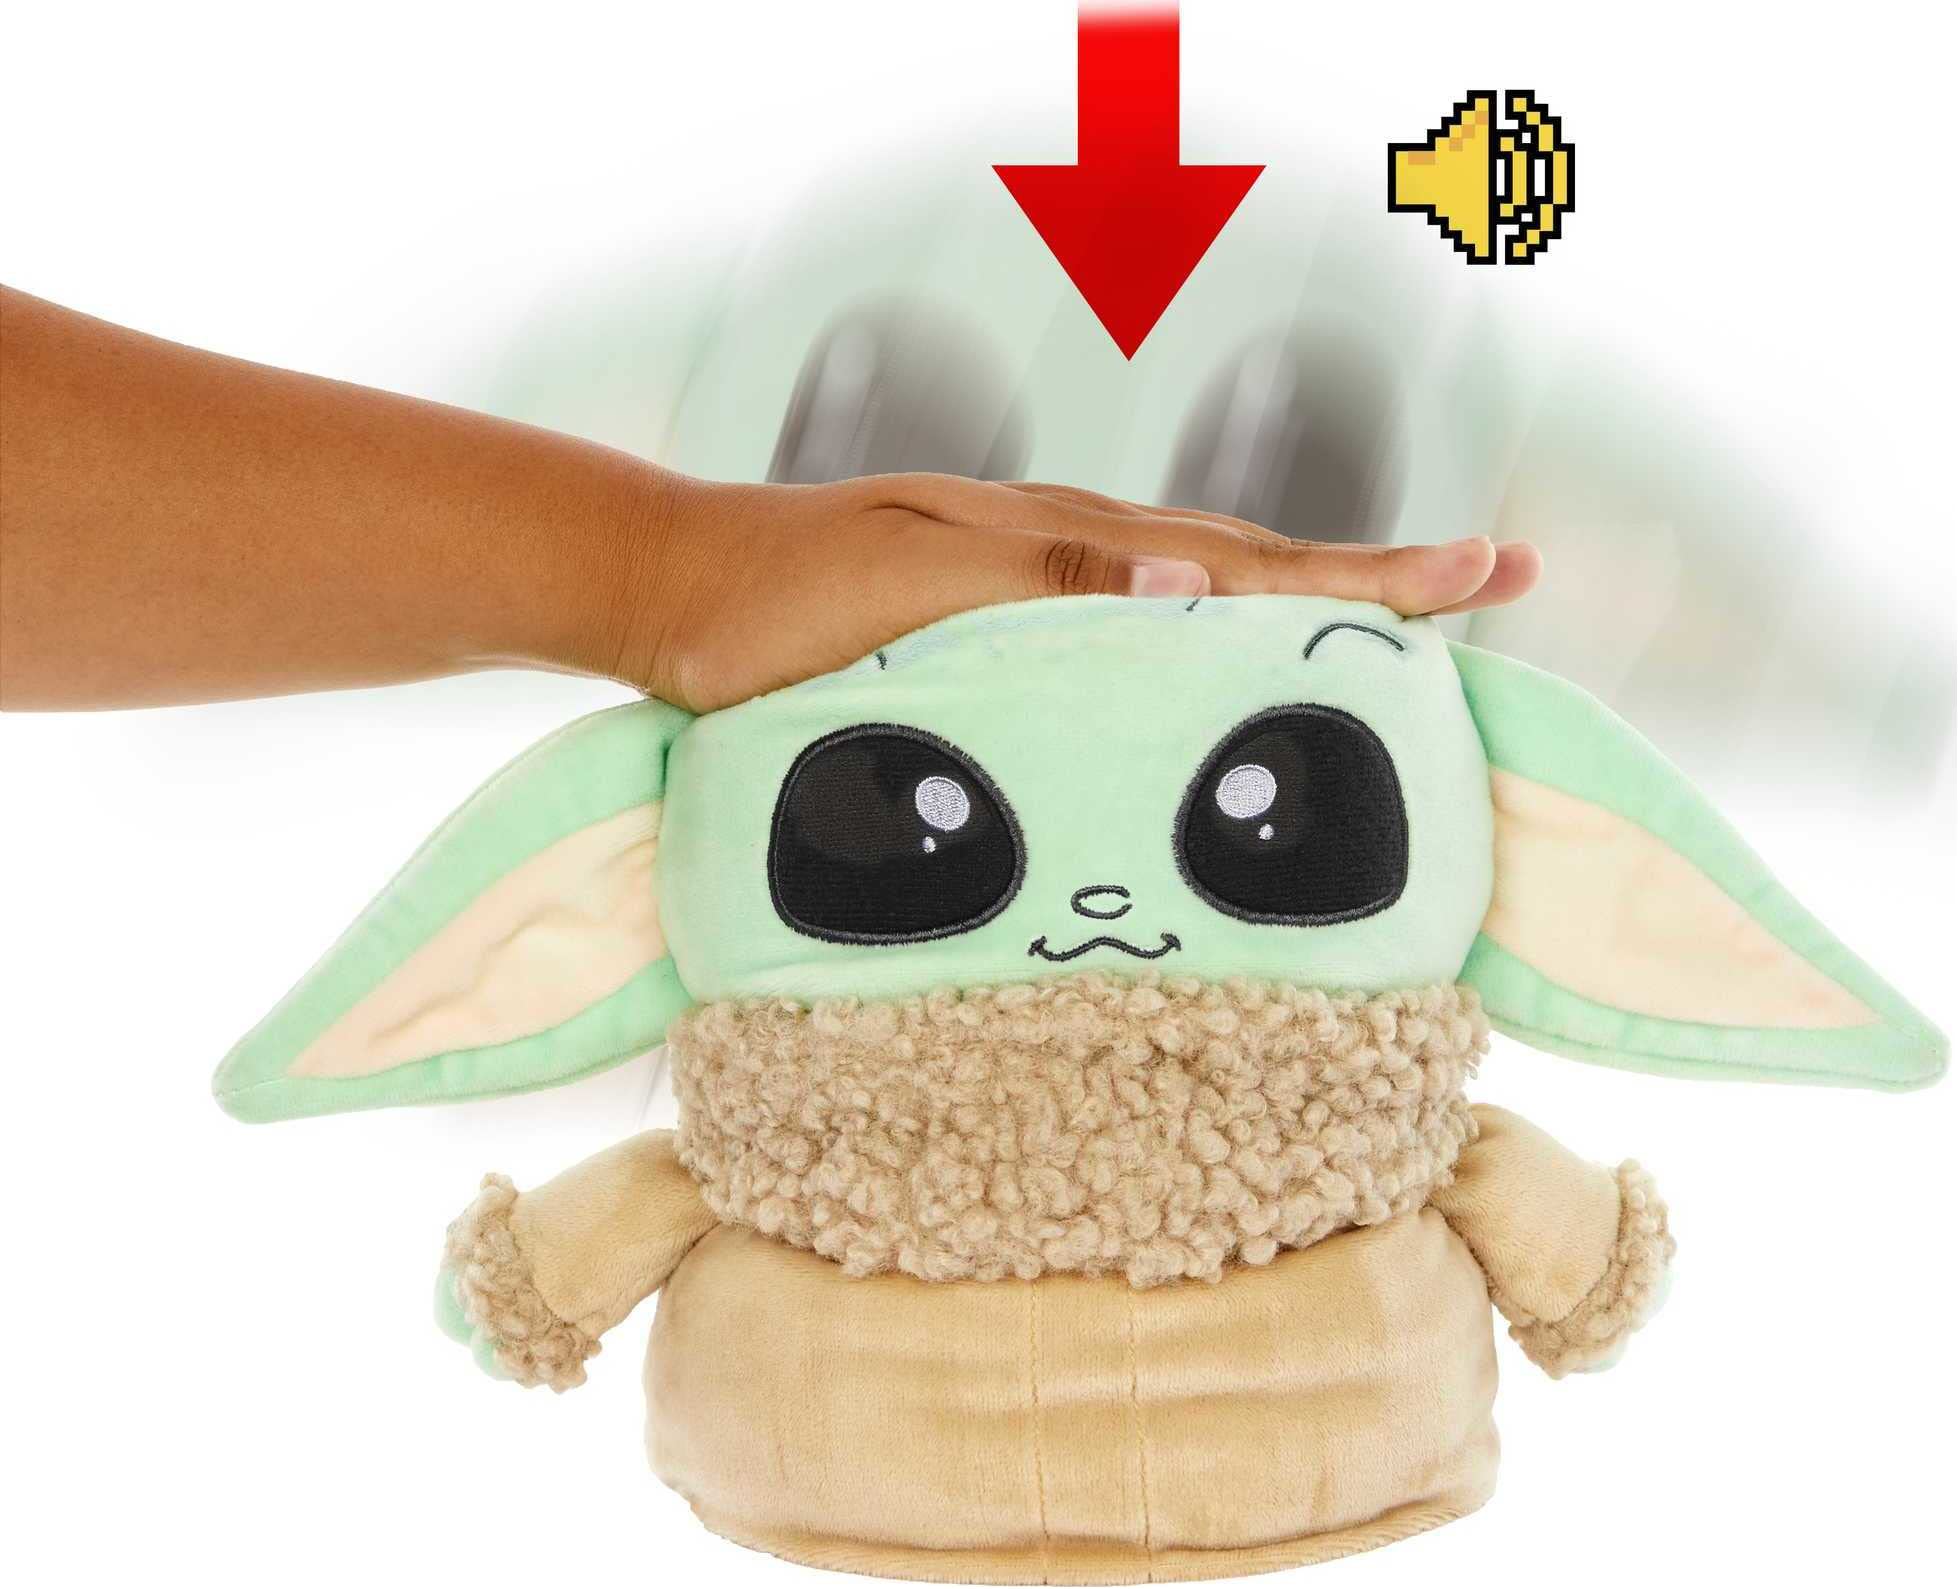 Mattel ​Star Wars Jumping Grogu Plush Toy with Jumping Action and Sounds, Soft Doll Inspired by Star Wars Mandalorian Book of Boba Fett